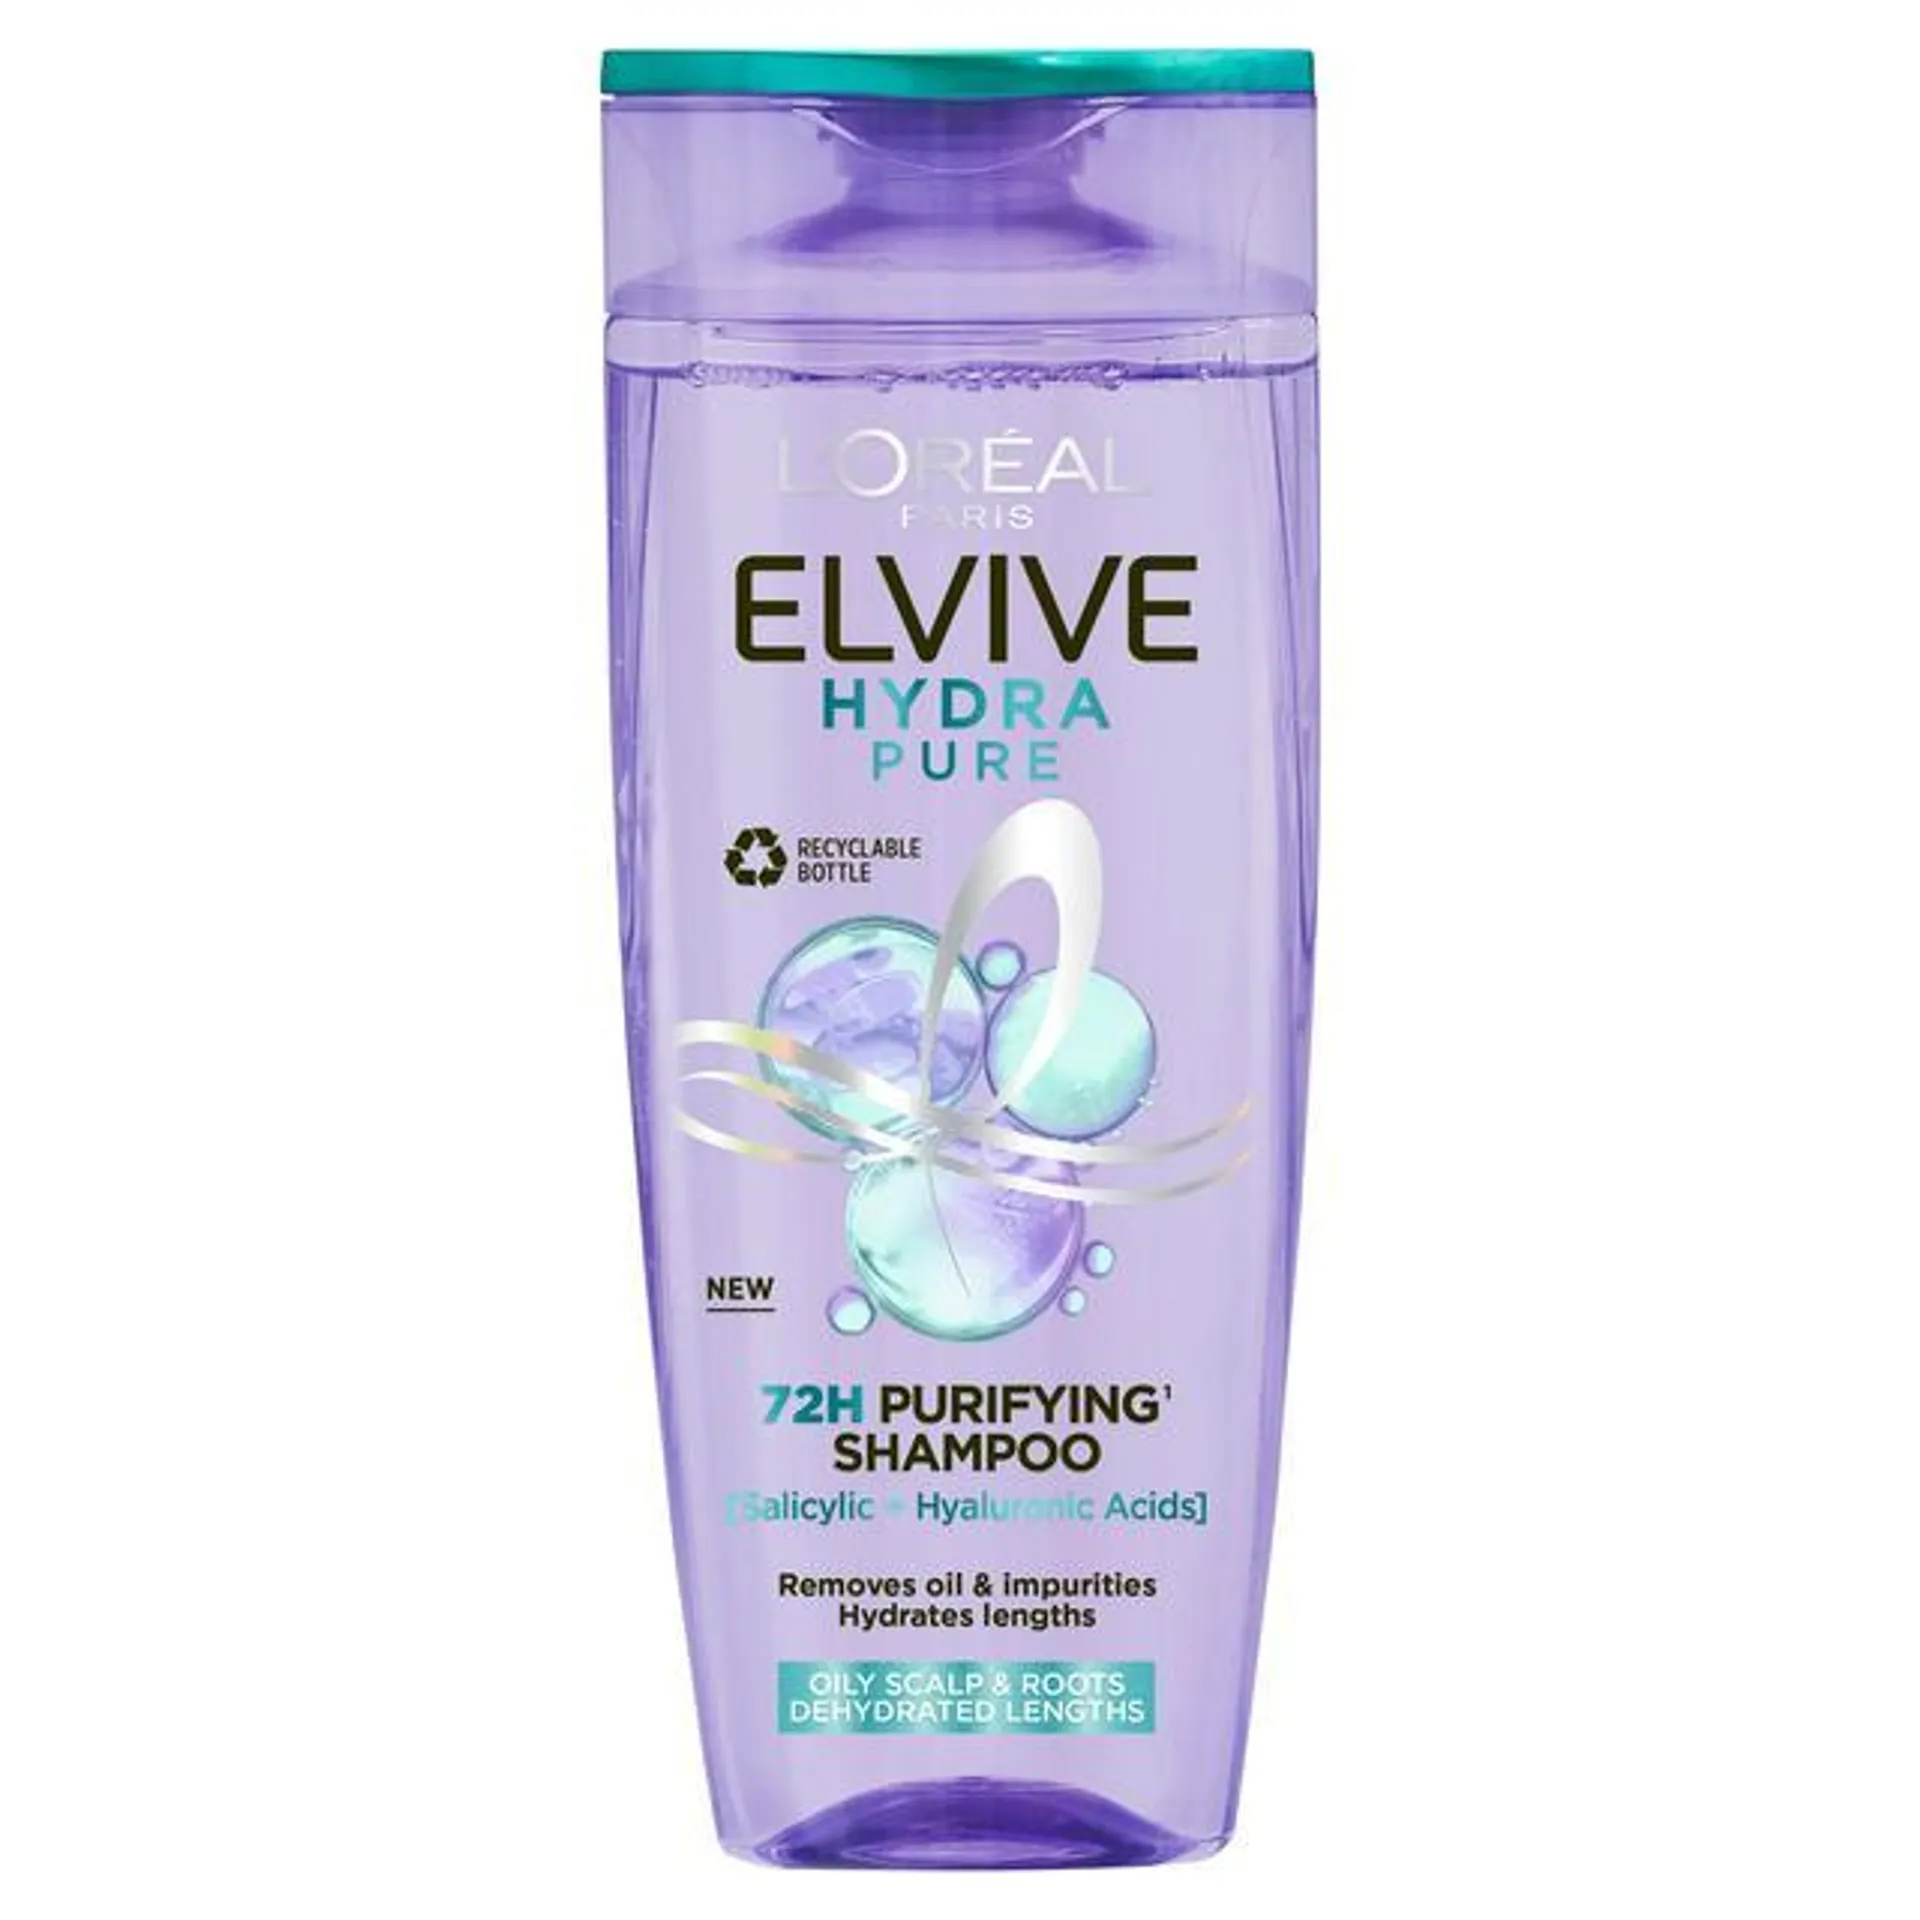 L'Oréal Paris Elvive Hydra Pure 72h Purifying Shampoo with Hyaluronic & Salicylic Acids 400ml